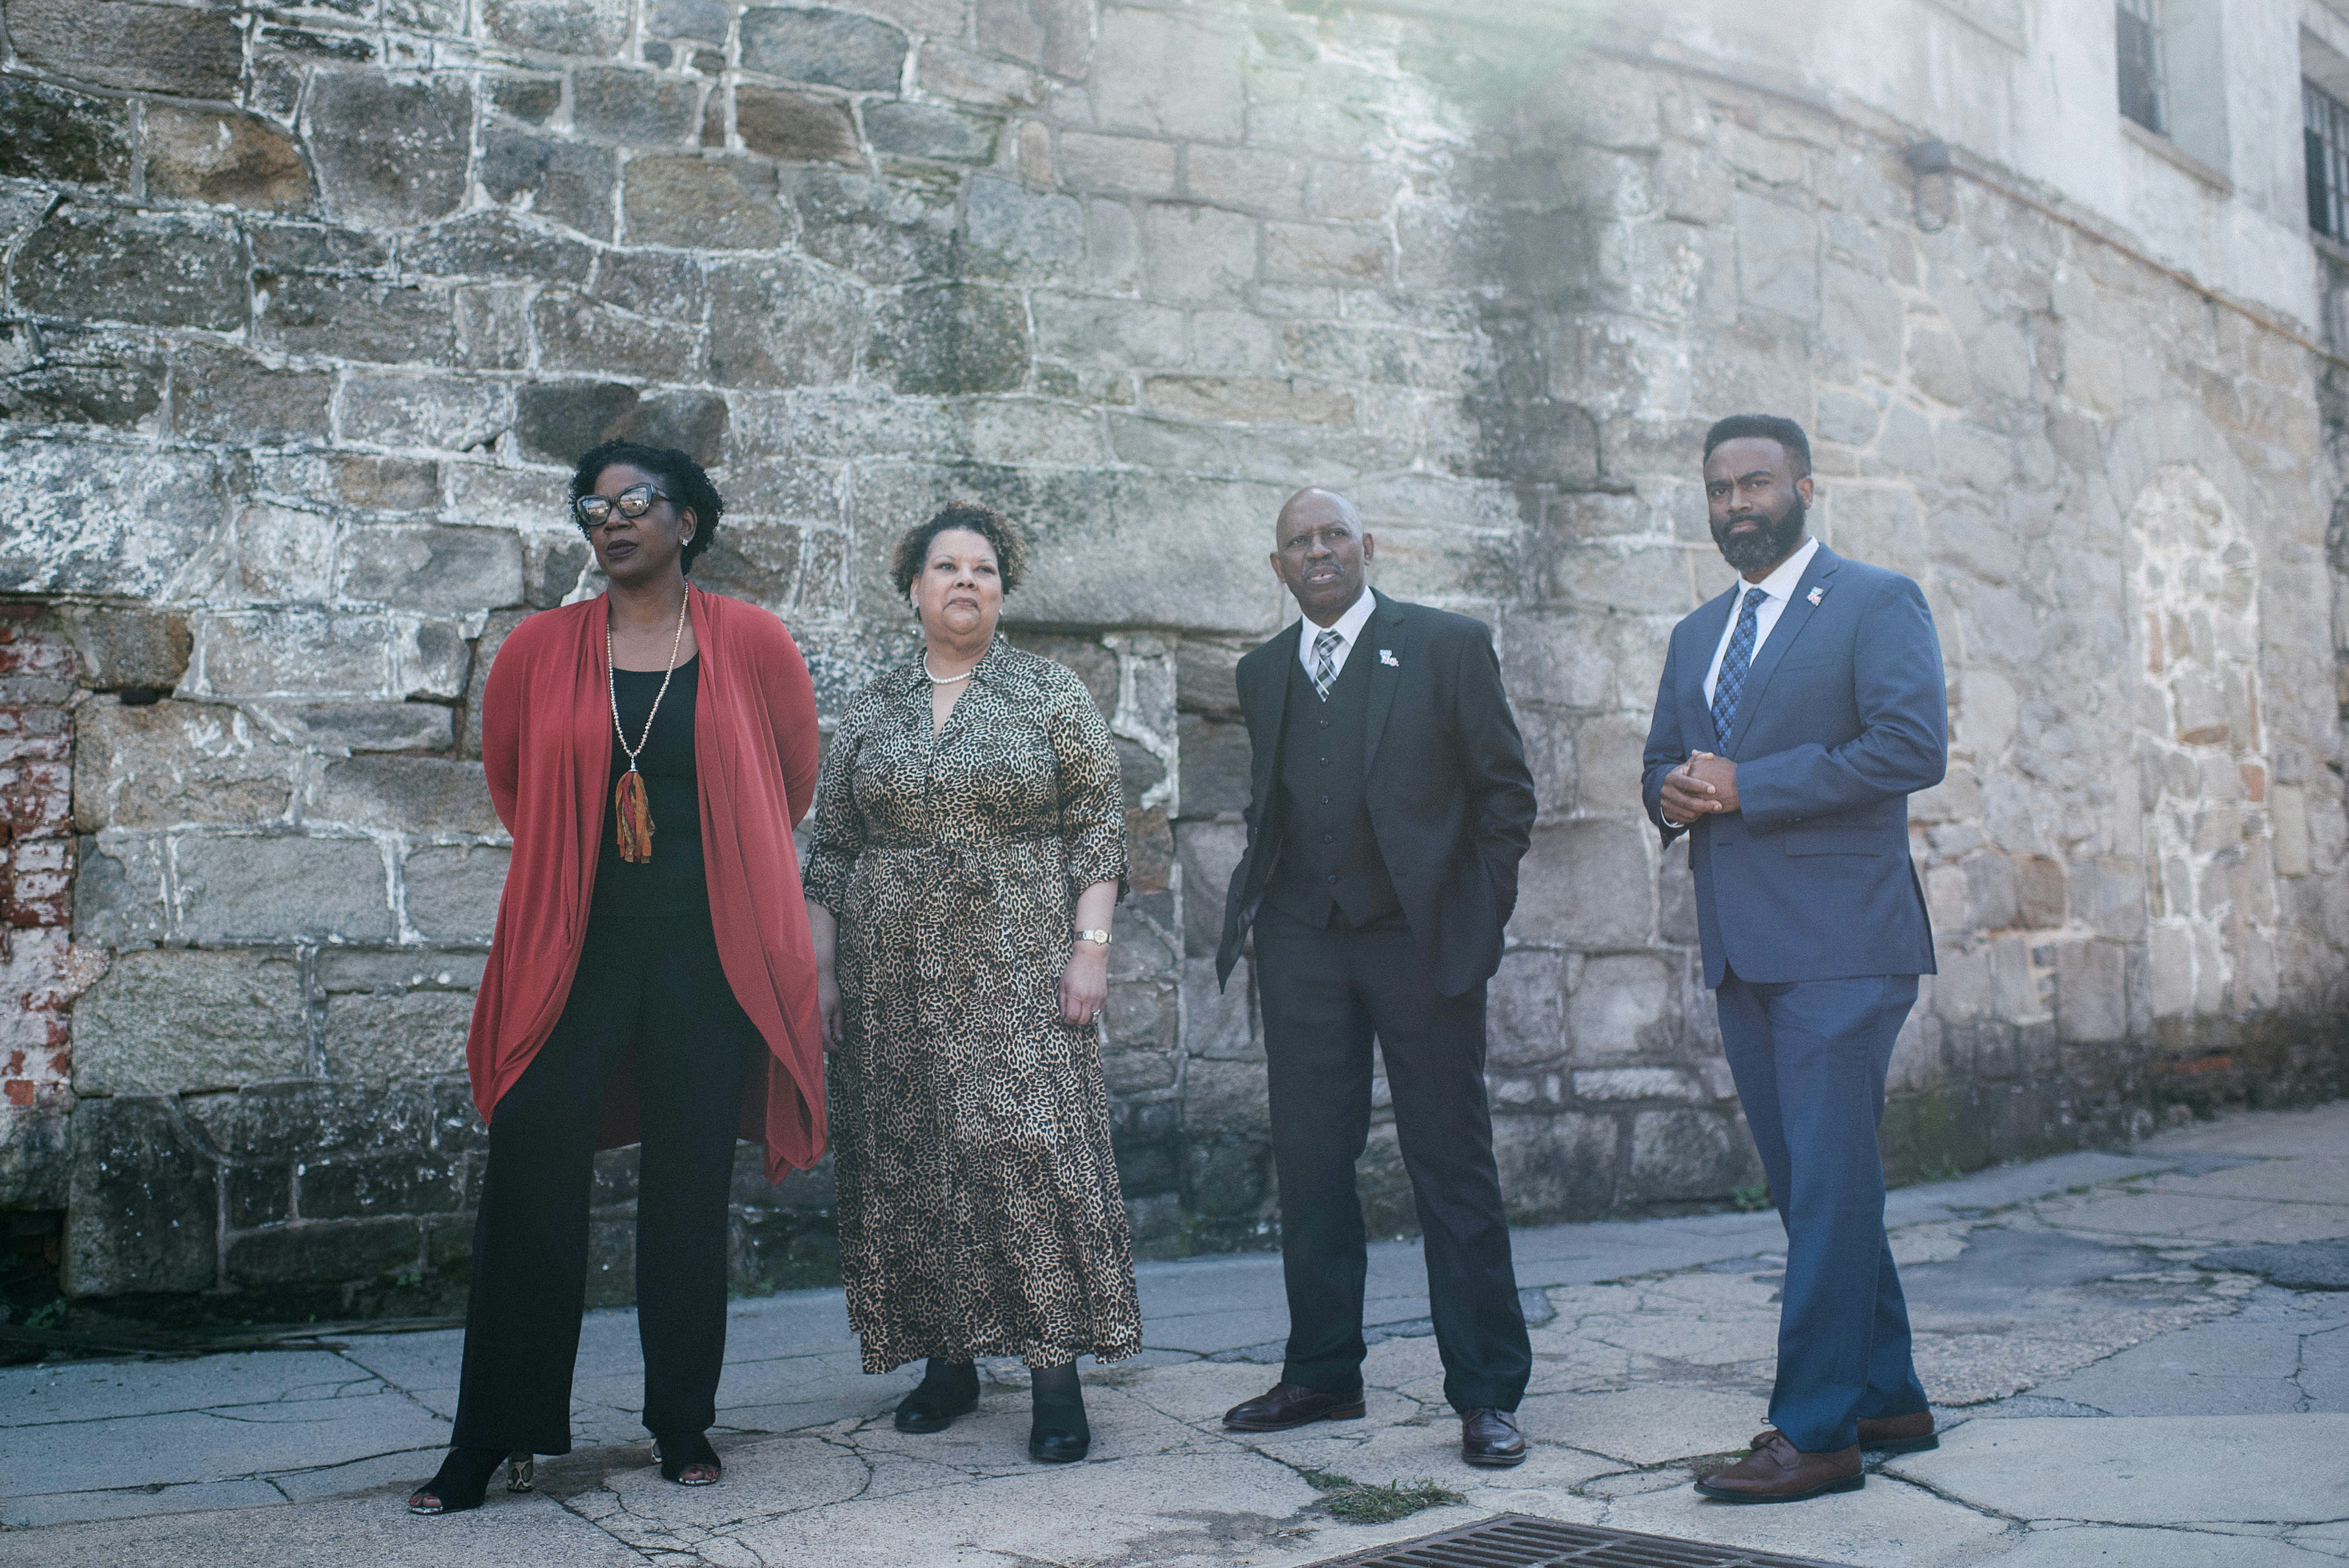 DeAnna Hoskins, left, Vivian D. Nixon, Norris Henderson, and Daryl Atkinson stand together at the Eastern State Penitentiary in Philadelphia, PA. on Monday, October 28, 2019. Hoskins, Nixon, Henderson and Atkinson moderated a presidential town hall on the issue of mass incarceration.Hannah Yoon for The Intercept